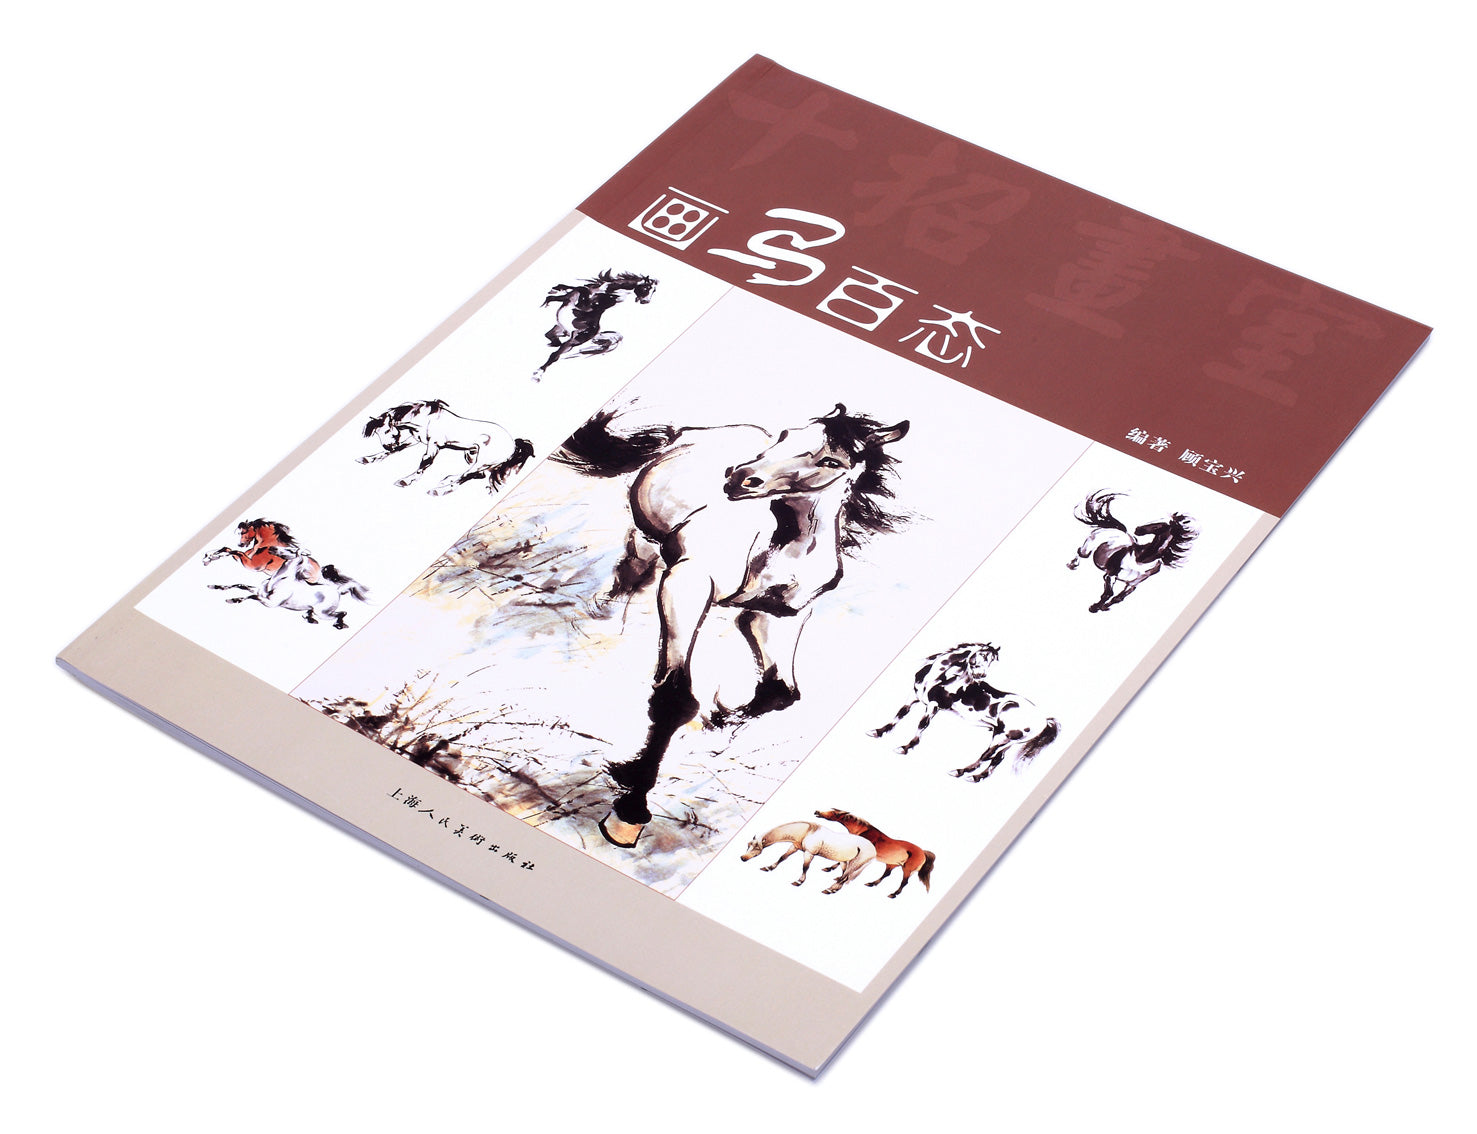 ten tricks in chinese painting is a book series with easy and understandable tricks for beginners to learn sumi chinese brush painting